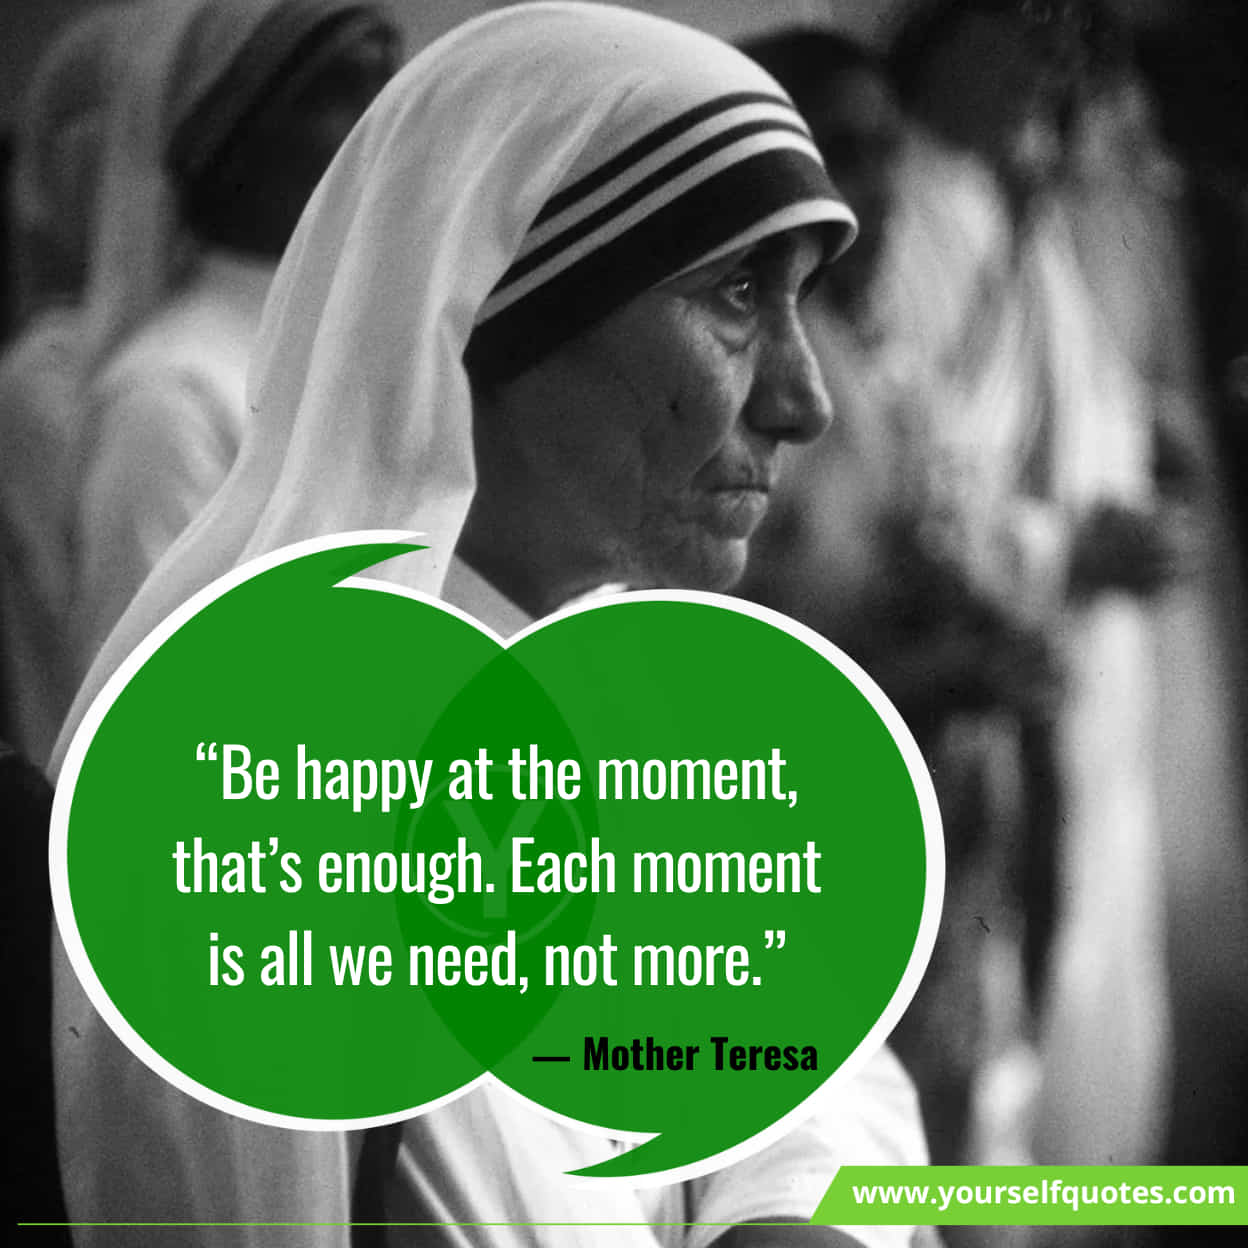 Best Mother Teresa Quotes On Happiness